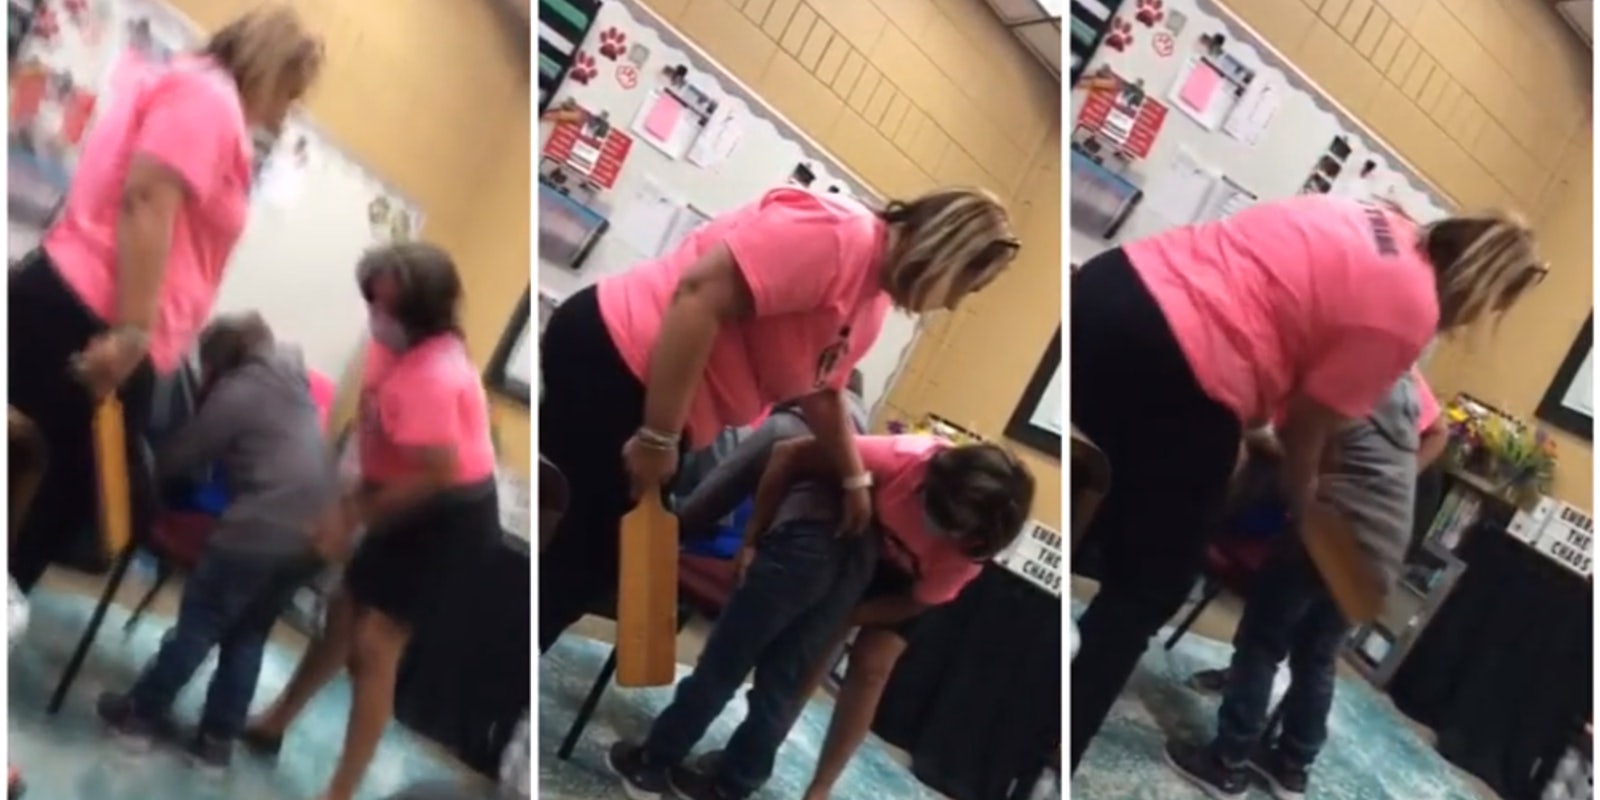 Two women in pink shirts restrain and assault a child with a wooden paddle.